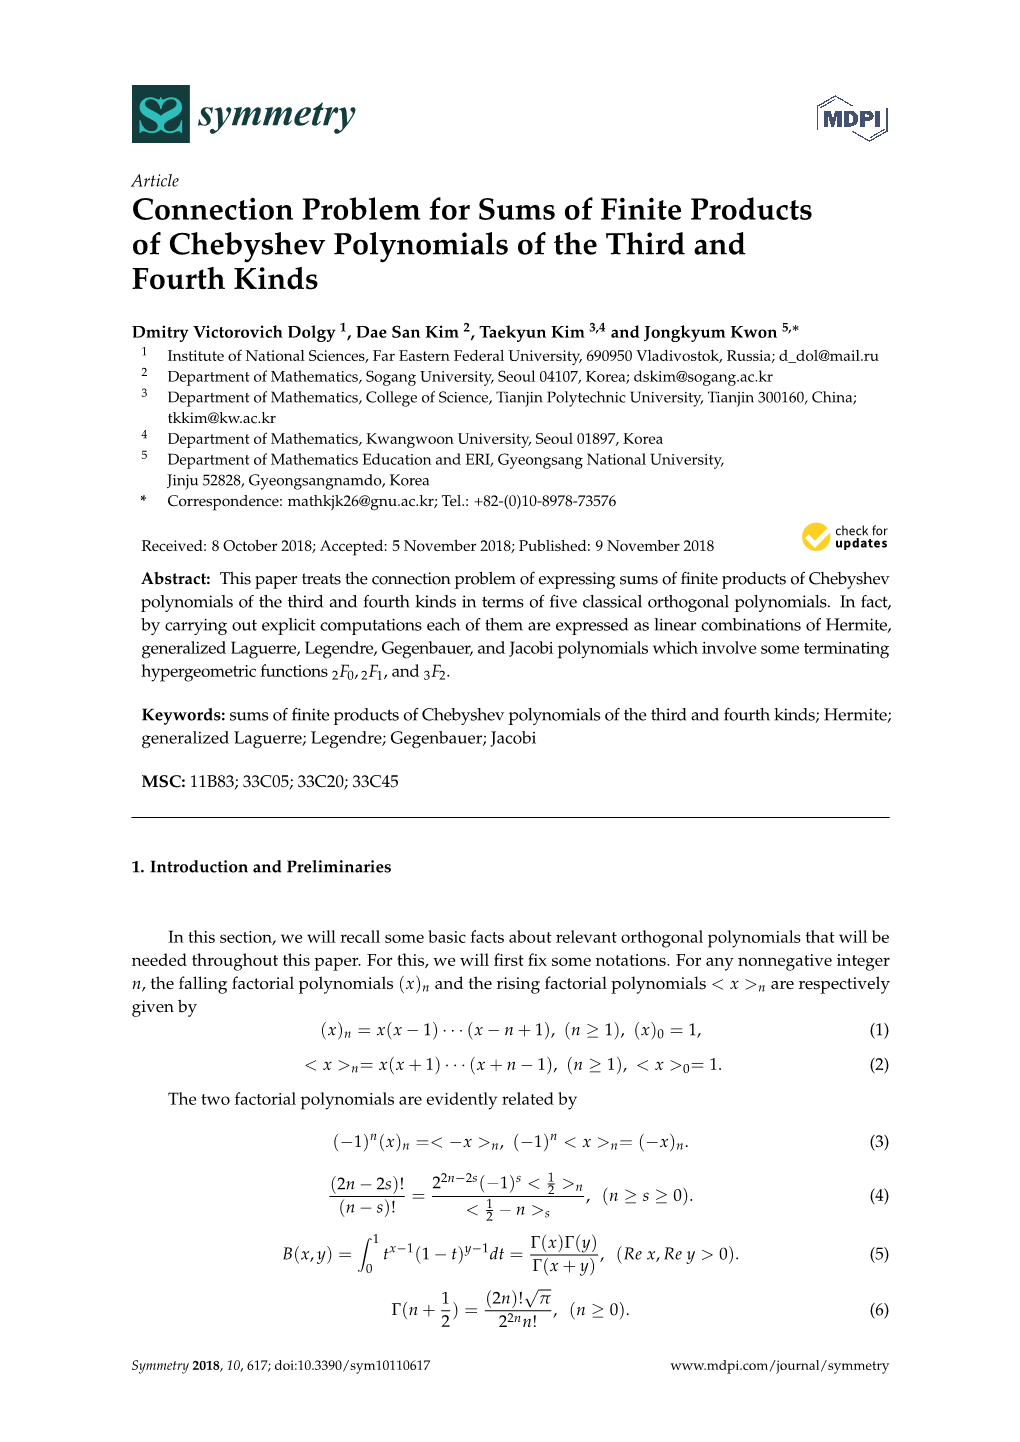 Connection Problem for Sums of Finite Products of Chebyshev Polynomials of the Third and Fourth Kinds